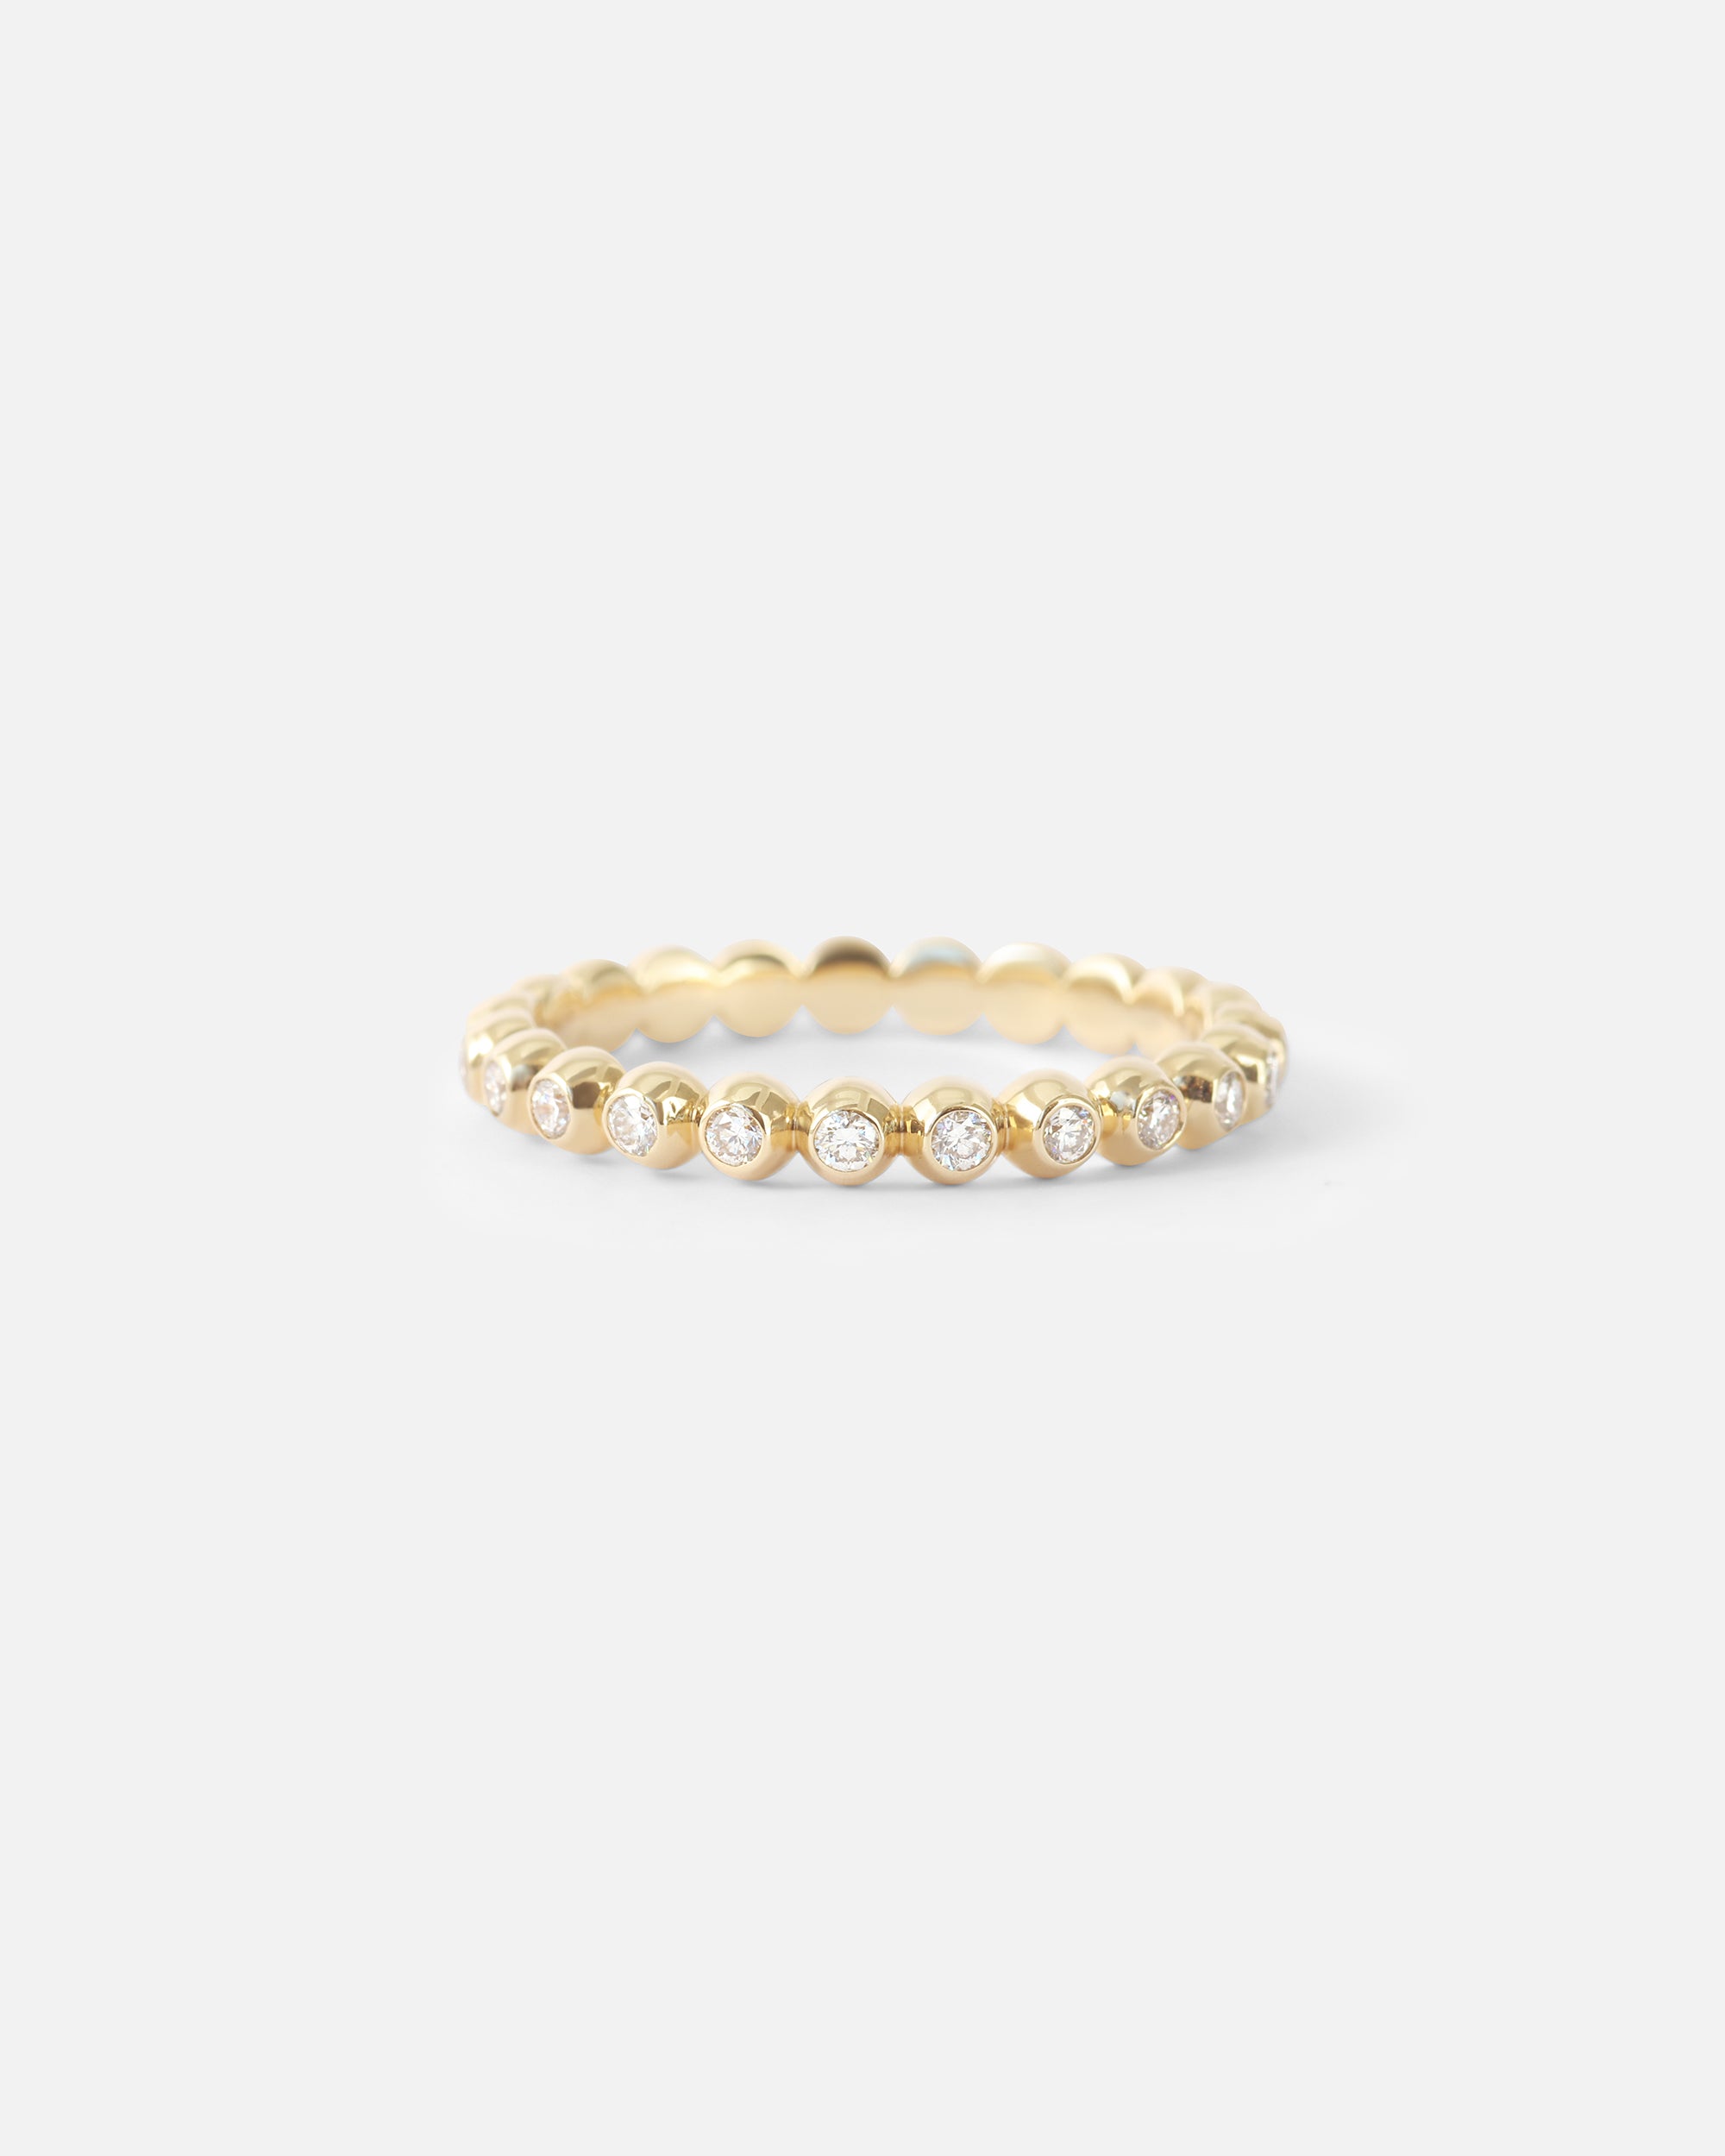 Petits / Diamond Band By Ruowei in Wedding Bands Category